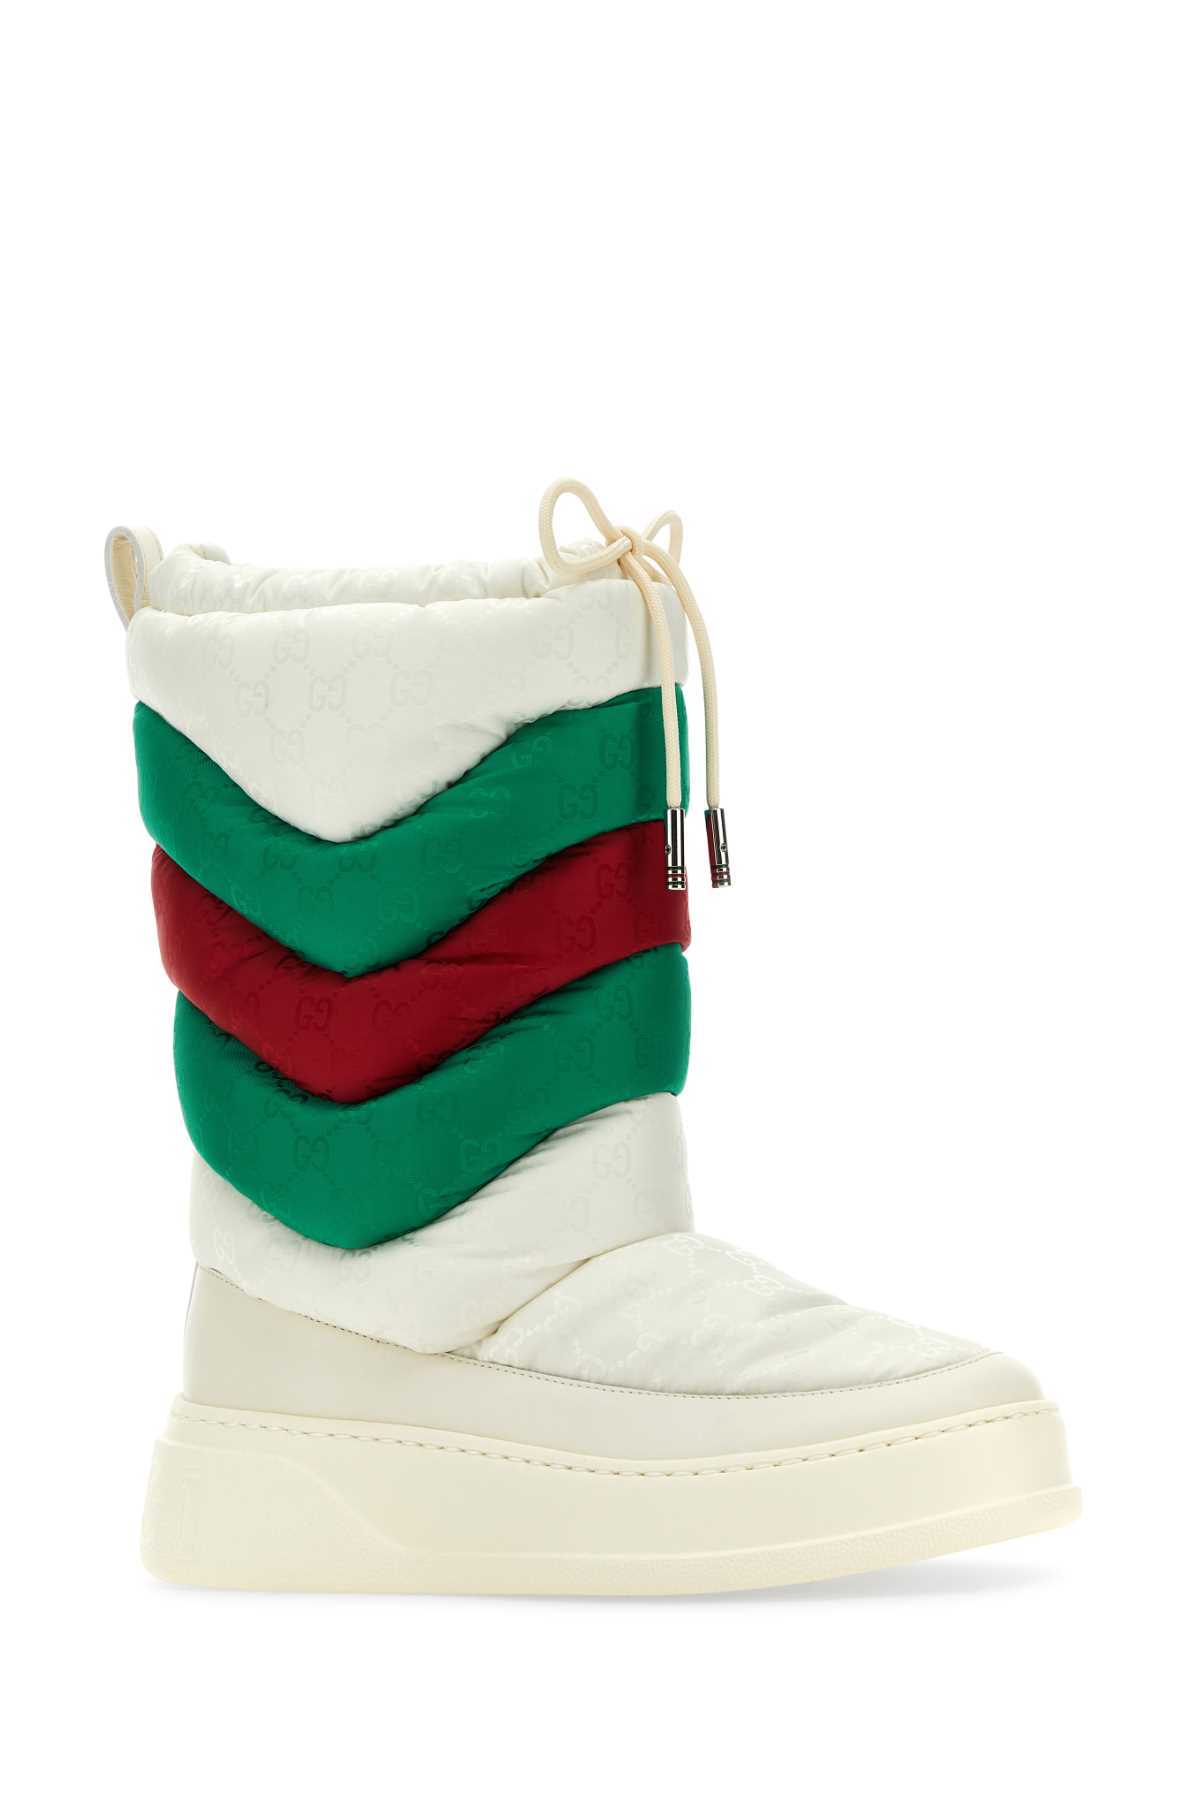 Gucci Chalk Fabric Boots In Offwhbshahreo